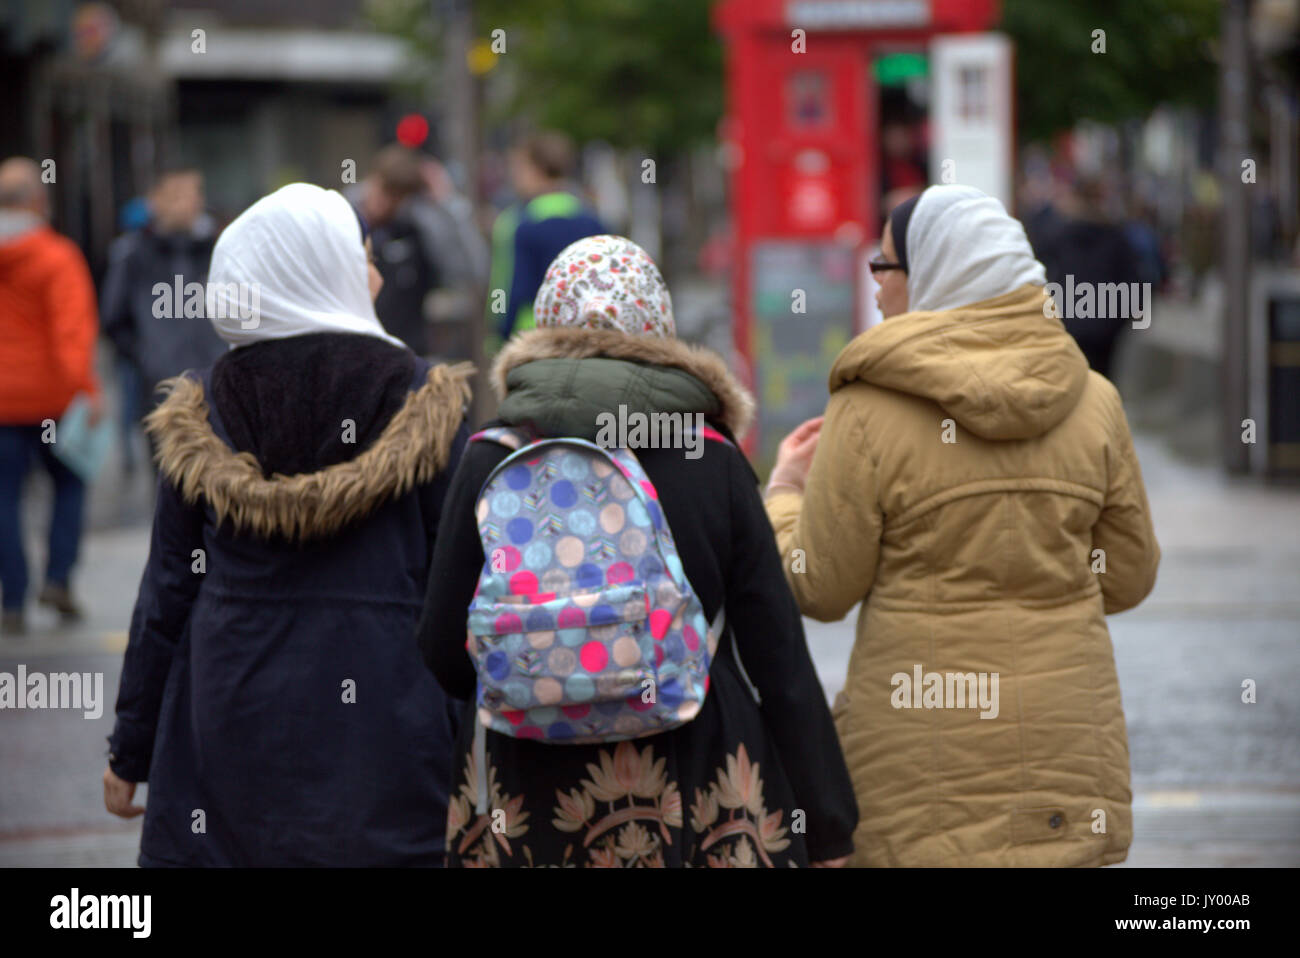 three 3 young Asian woman with hijab scarf viewed from behind Stock Photo